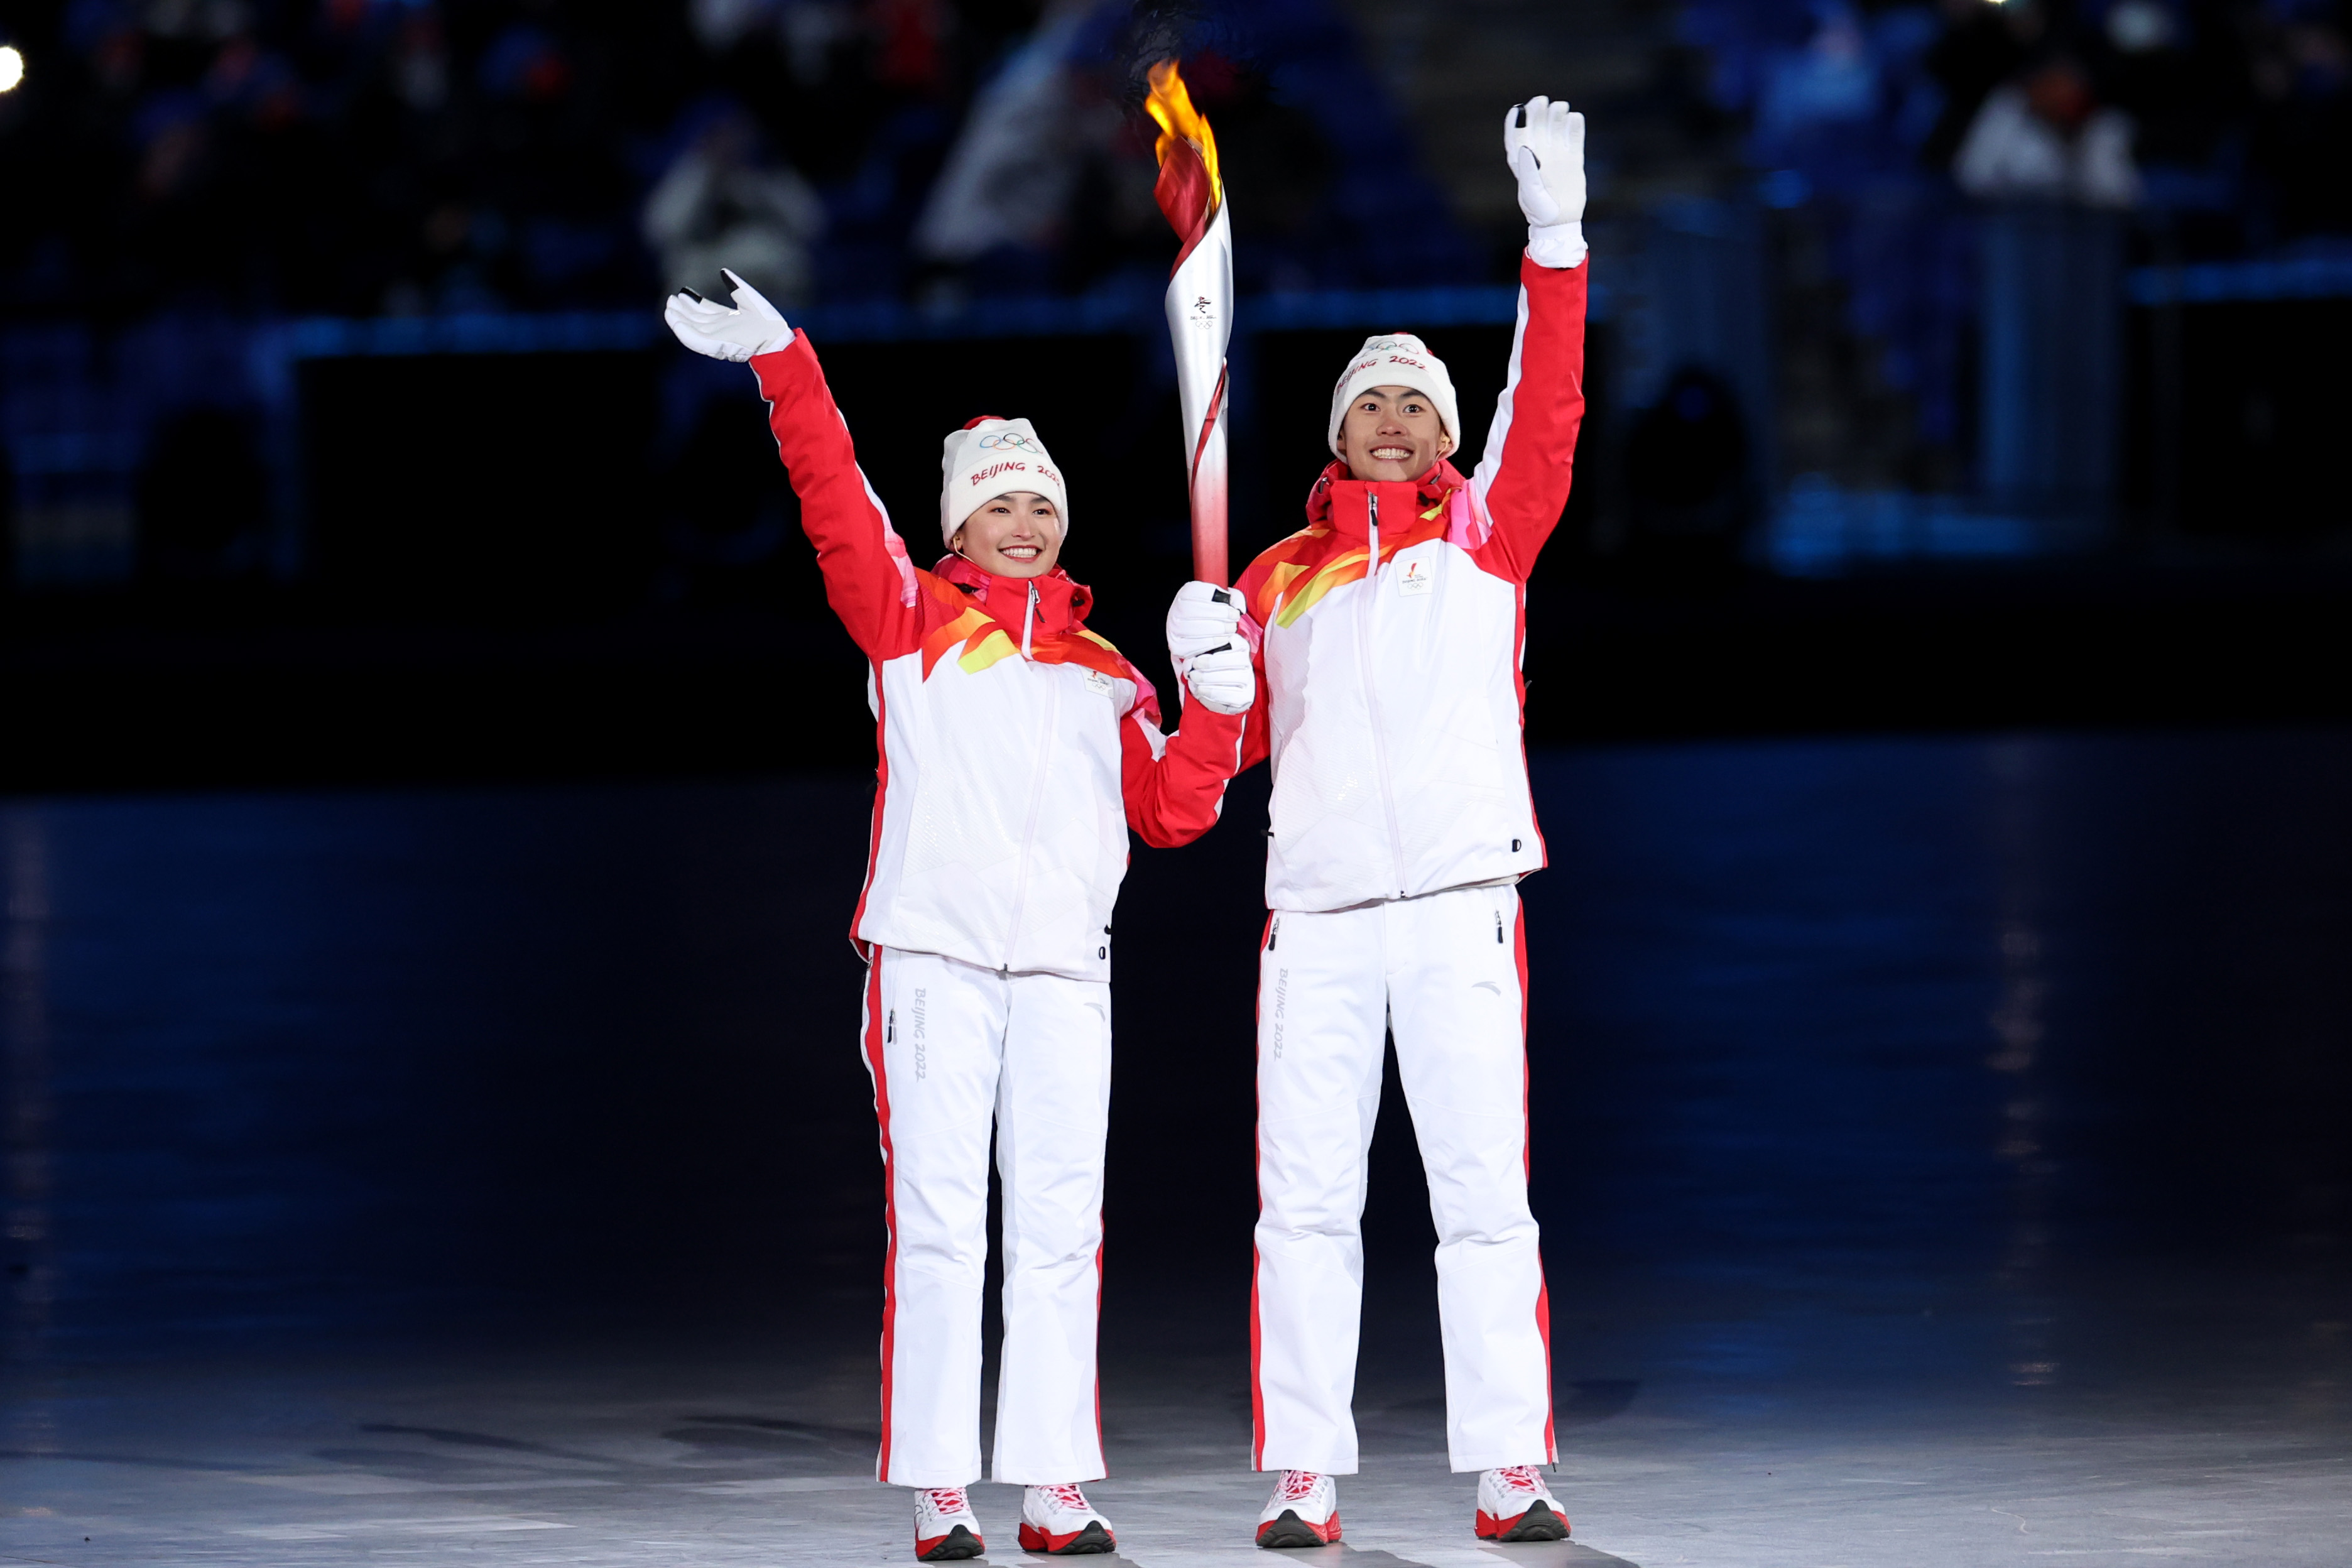 Torch bearers Dinigeer Yilamujiang and Jiawen Zhao of Team China hold the Olympic flame during the Opening Ceremony of the Beijing 2022 Winter Olympics at the Beijing National Stadium on February 04 in Beijing, China. 